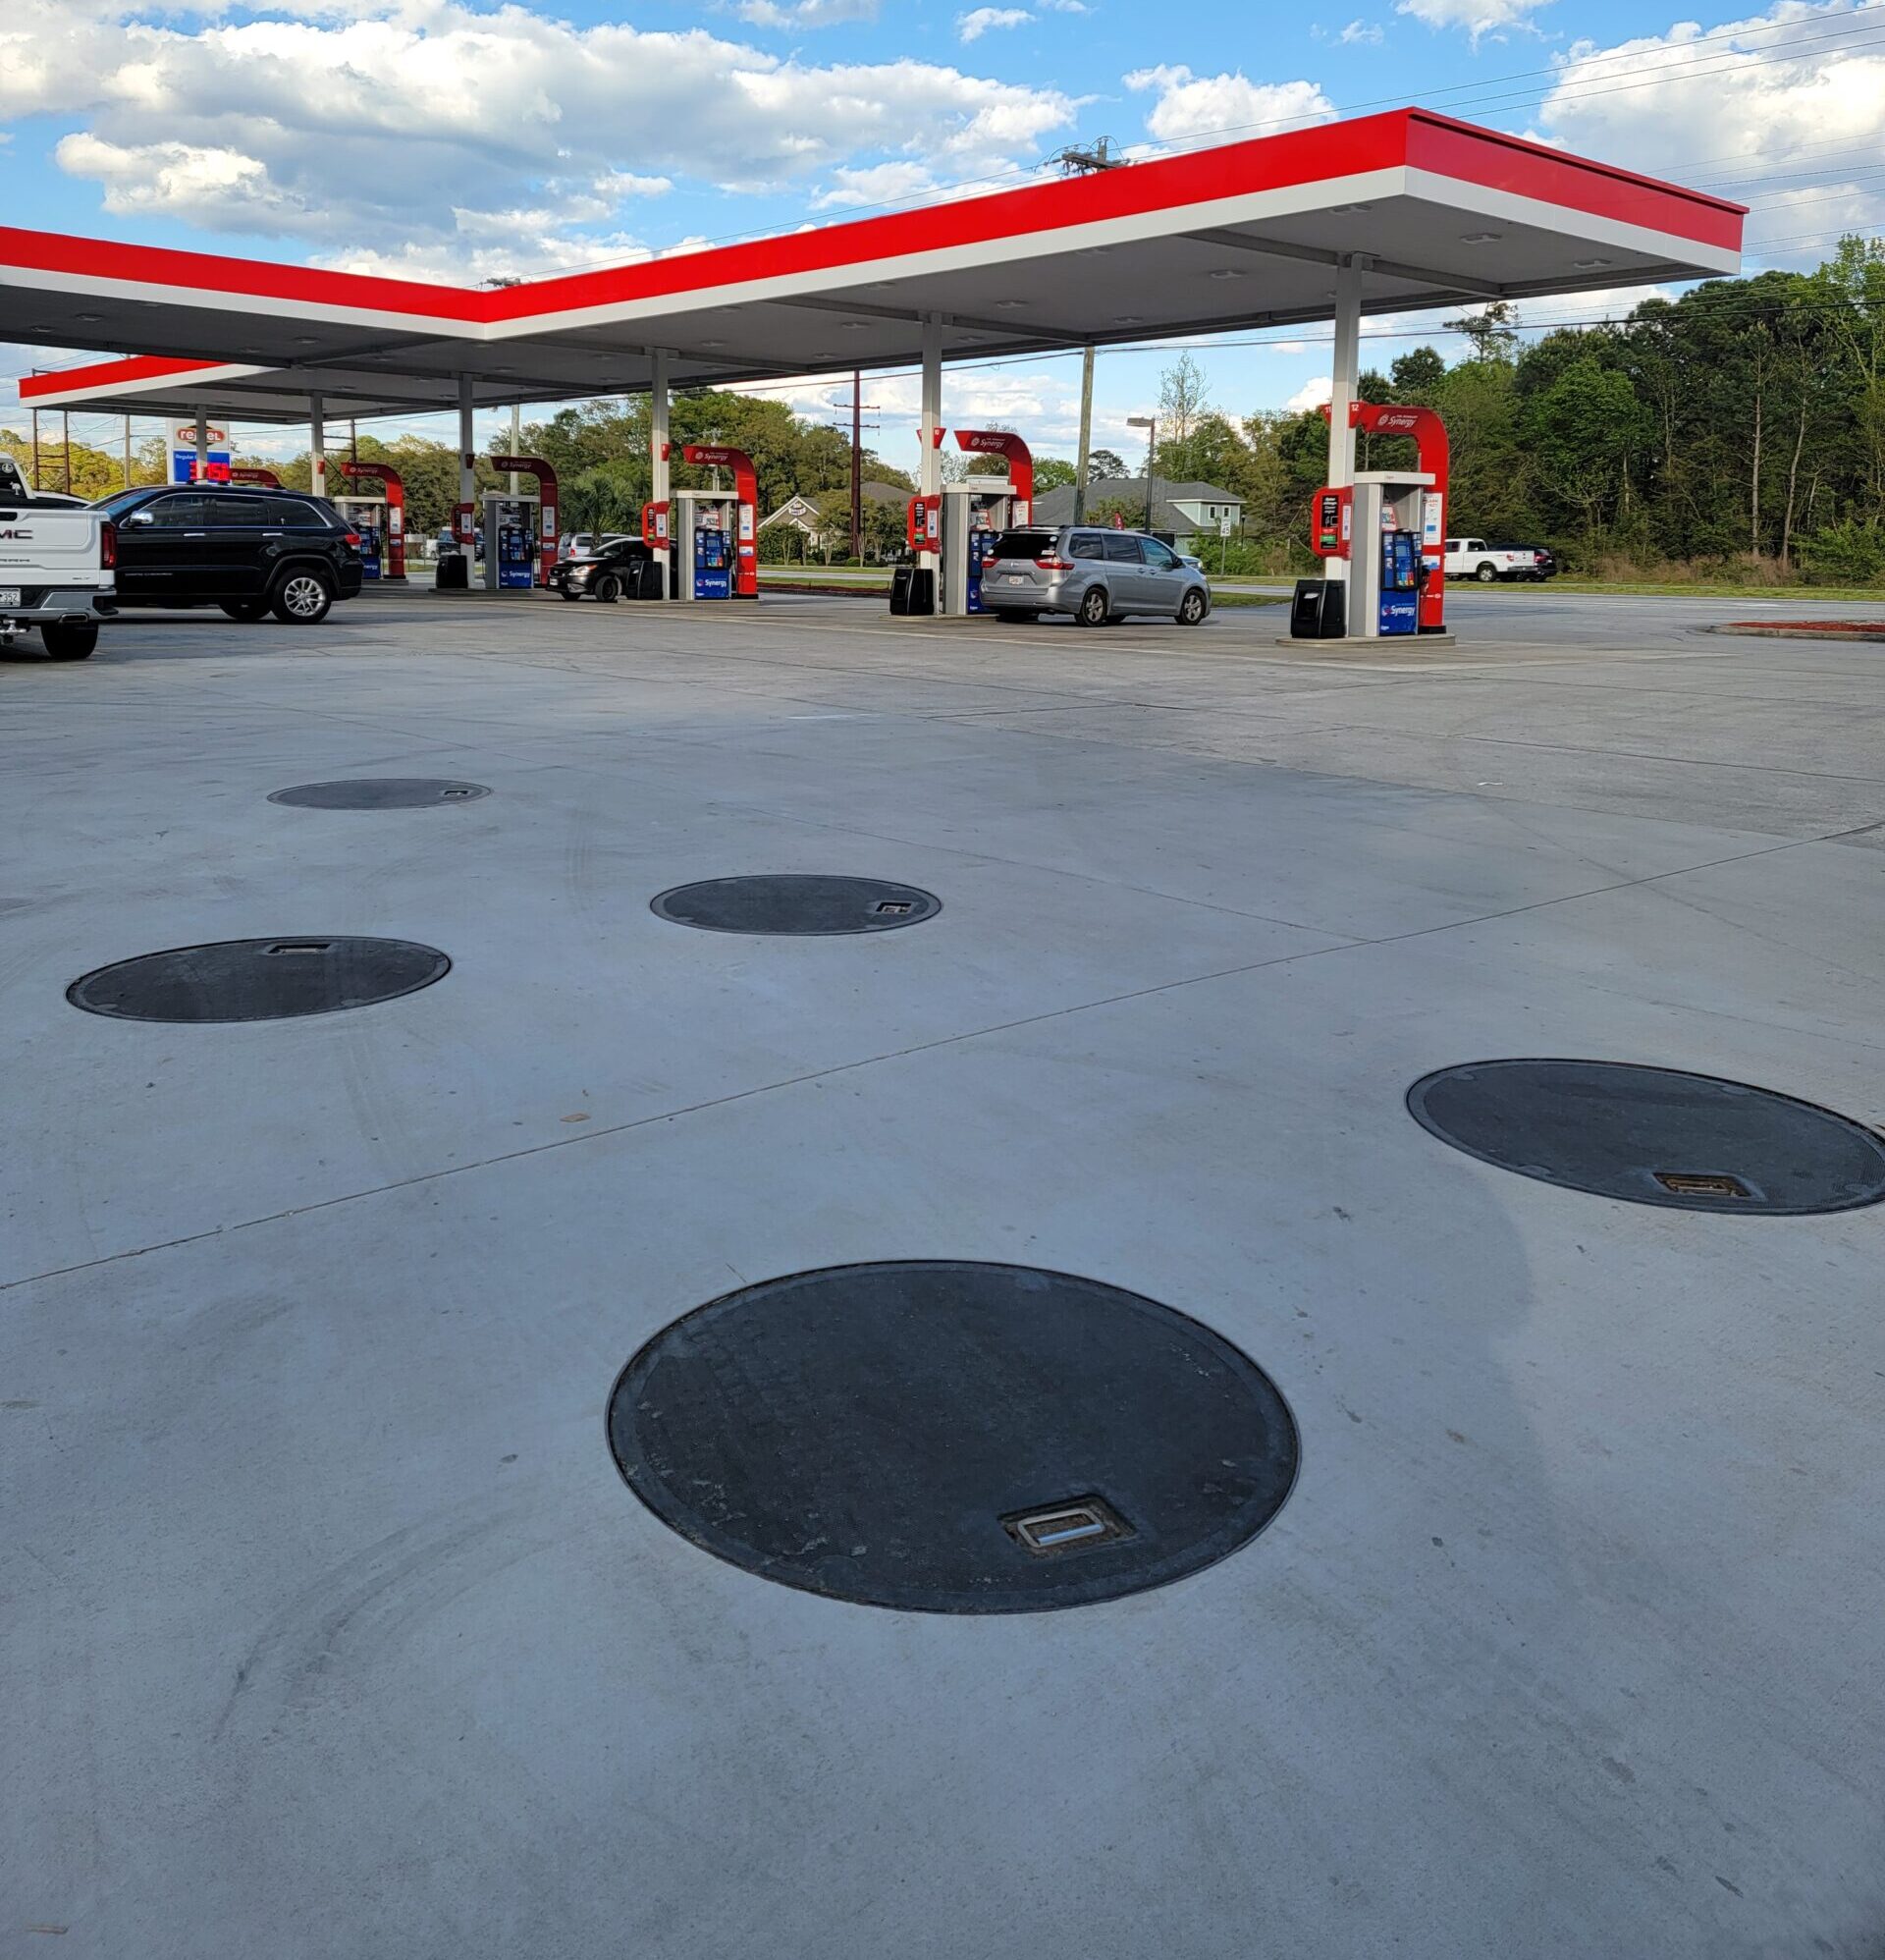 COMPOSITE ROUND COVERS INSTALLED AT GAS STATION